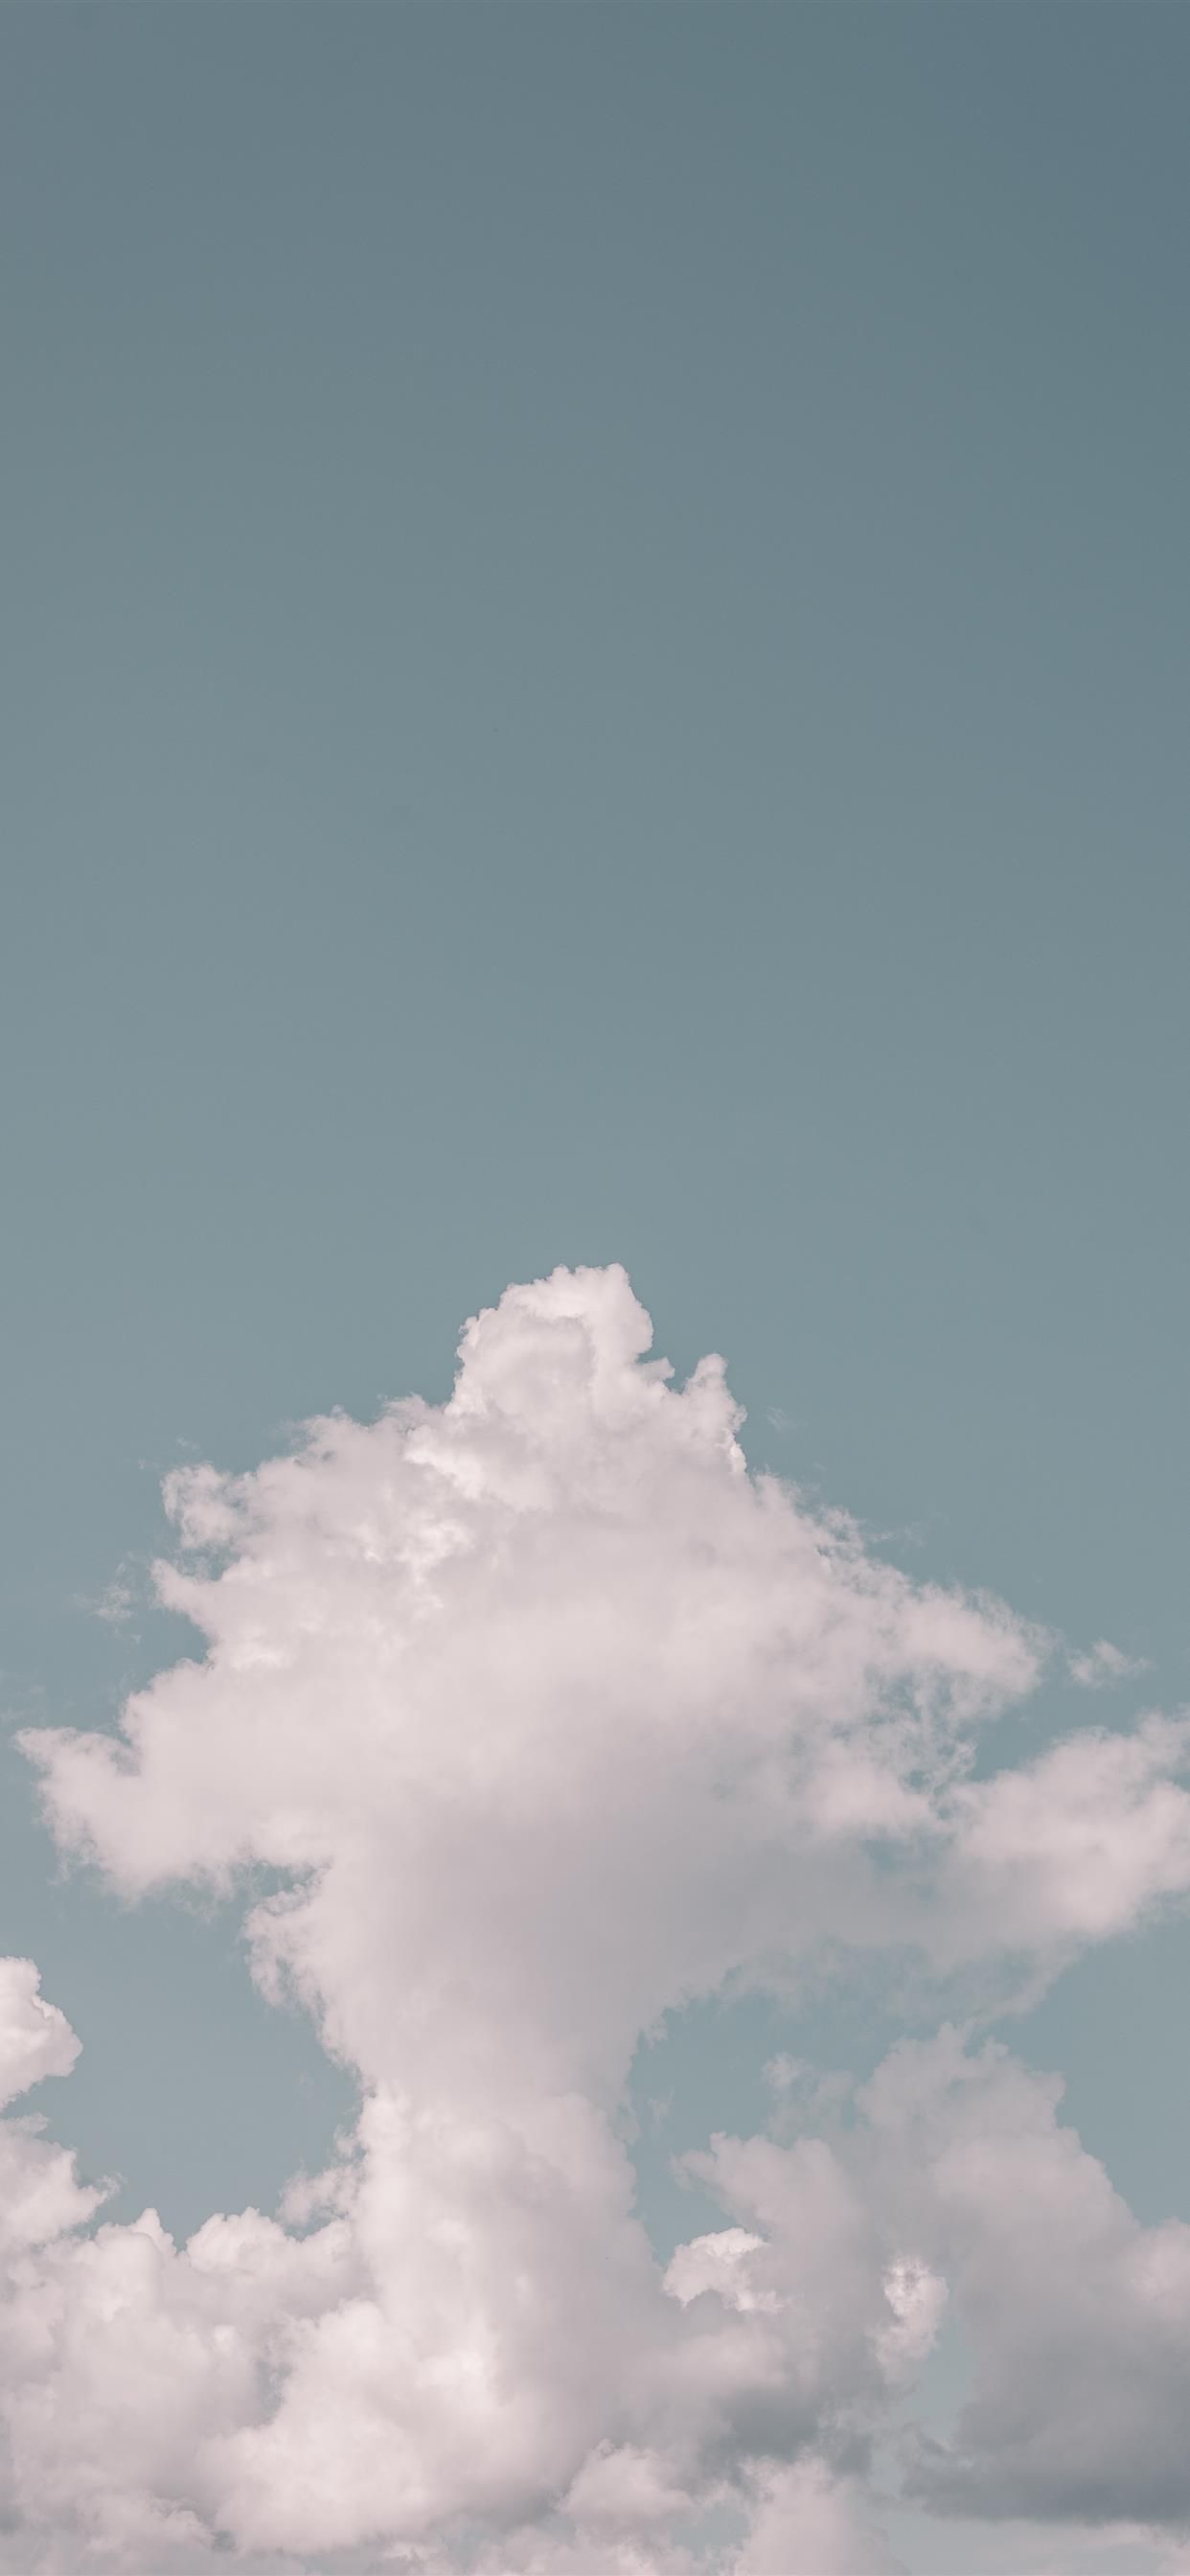 High clouds iPhone X Wallpaper Free Download